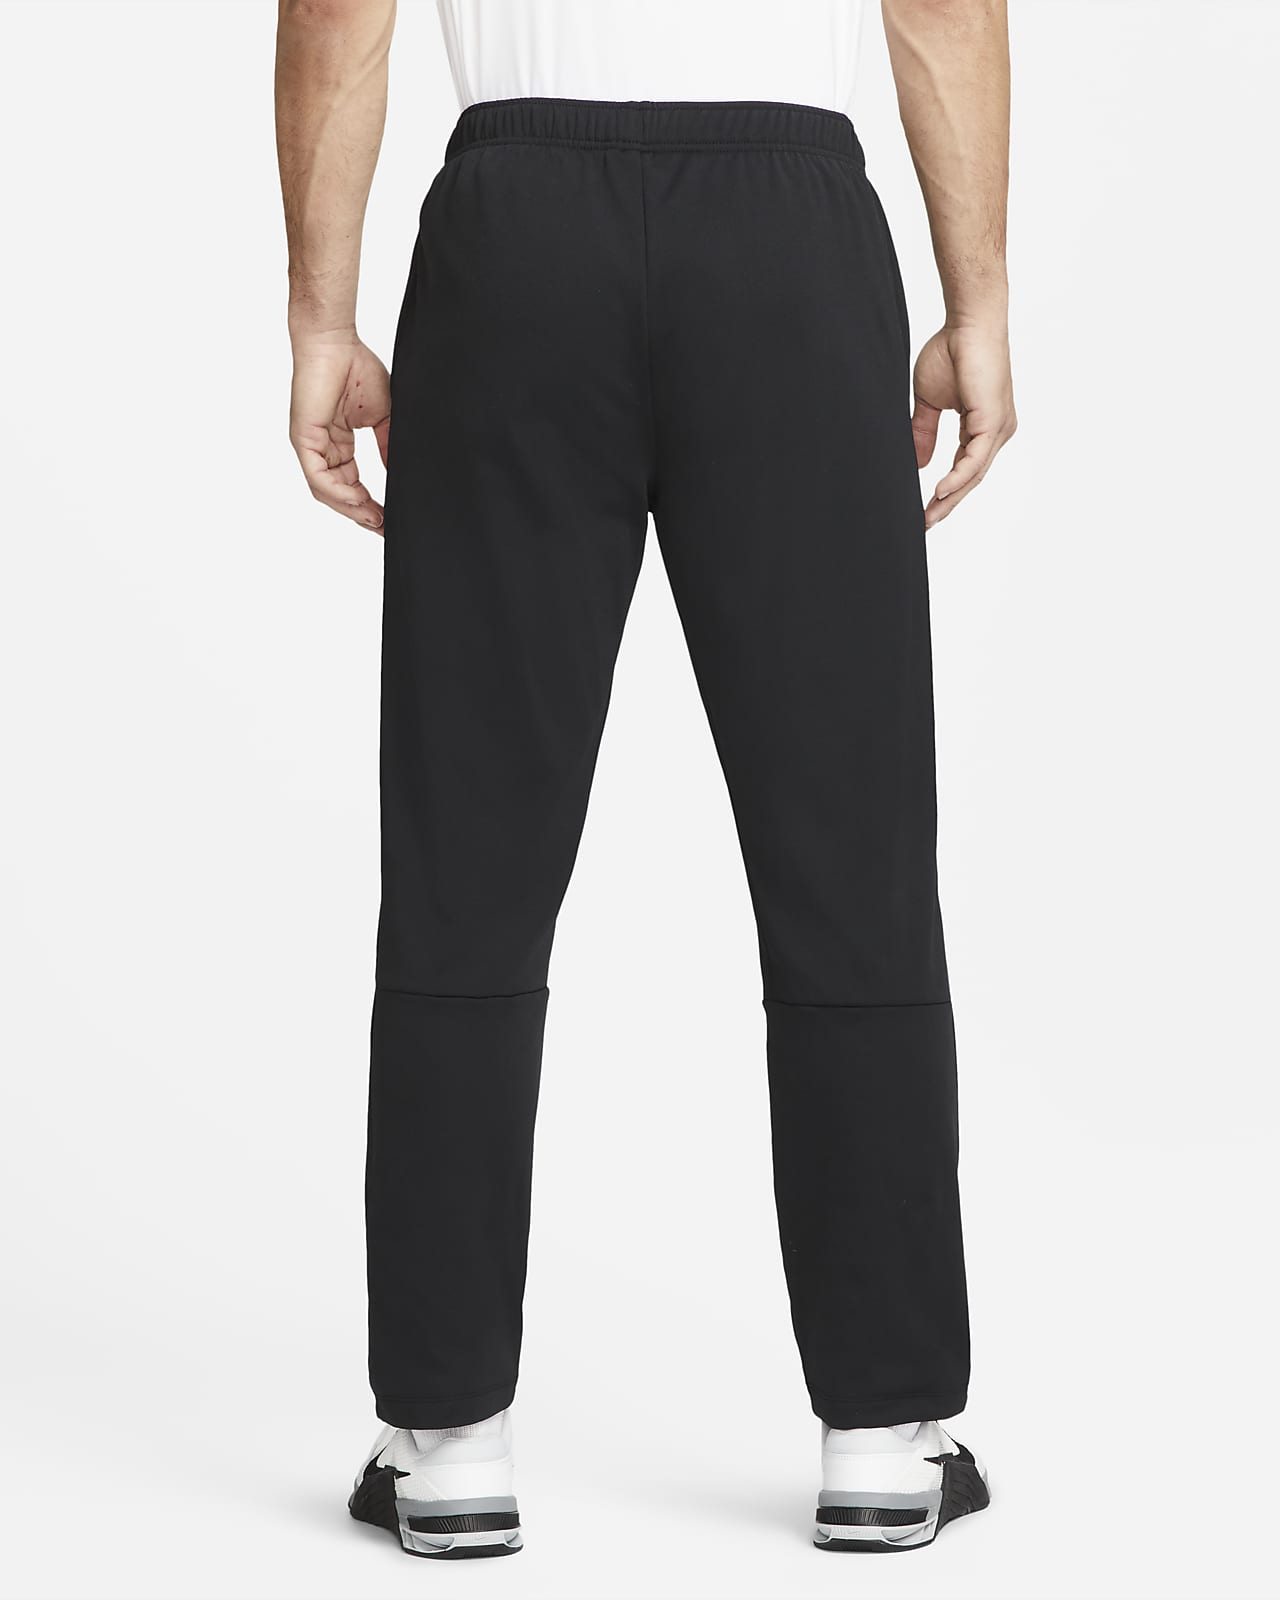 The 8 best workout pants for men